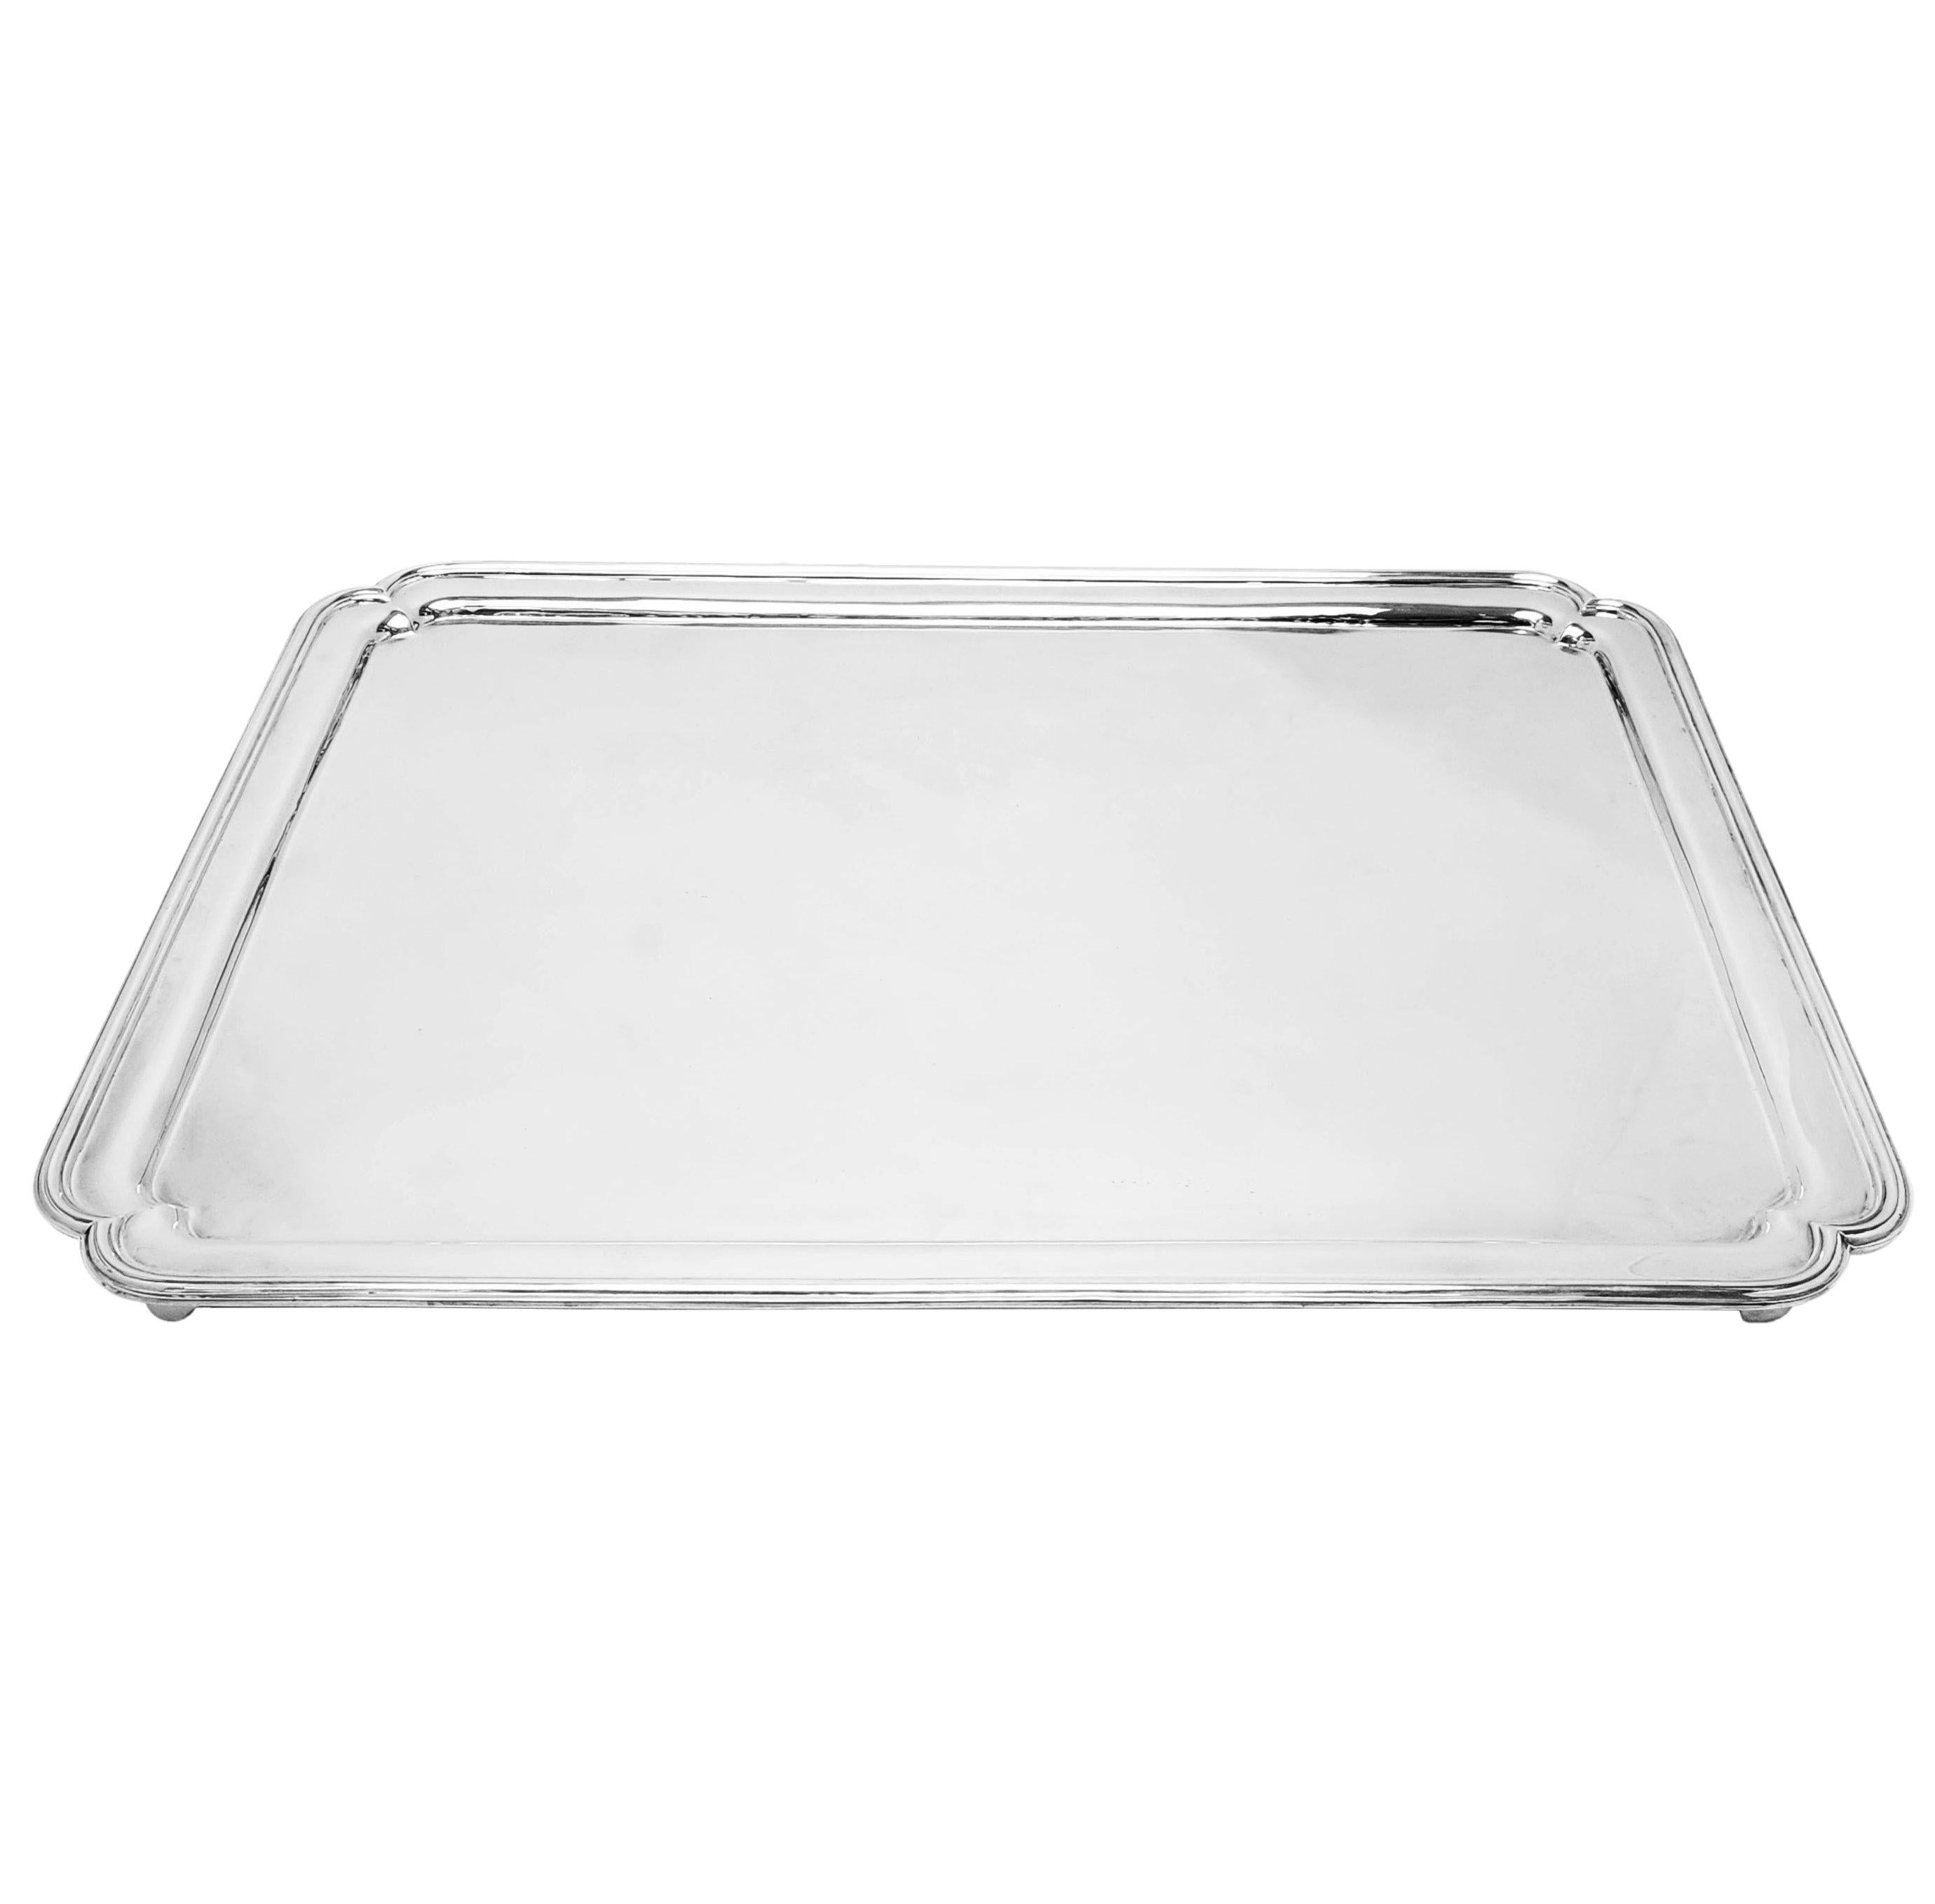 A magnificent vintage rectangular Sterling Silver Tray with shaped corners and standing on 4 raised feet. This Silver Salver is of rather monumental proportions and is a perfect statement piece.


Made in London in 1933 for Harrods (Richard Woodman